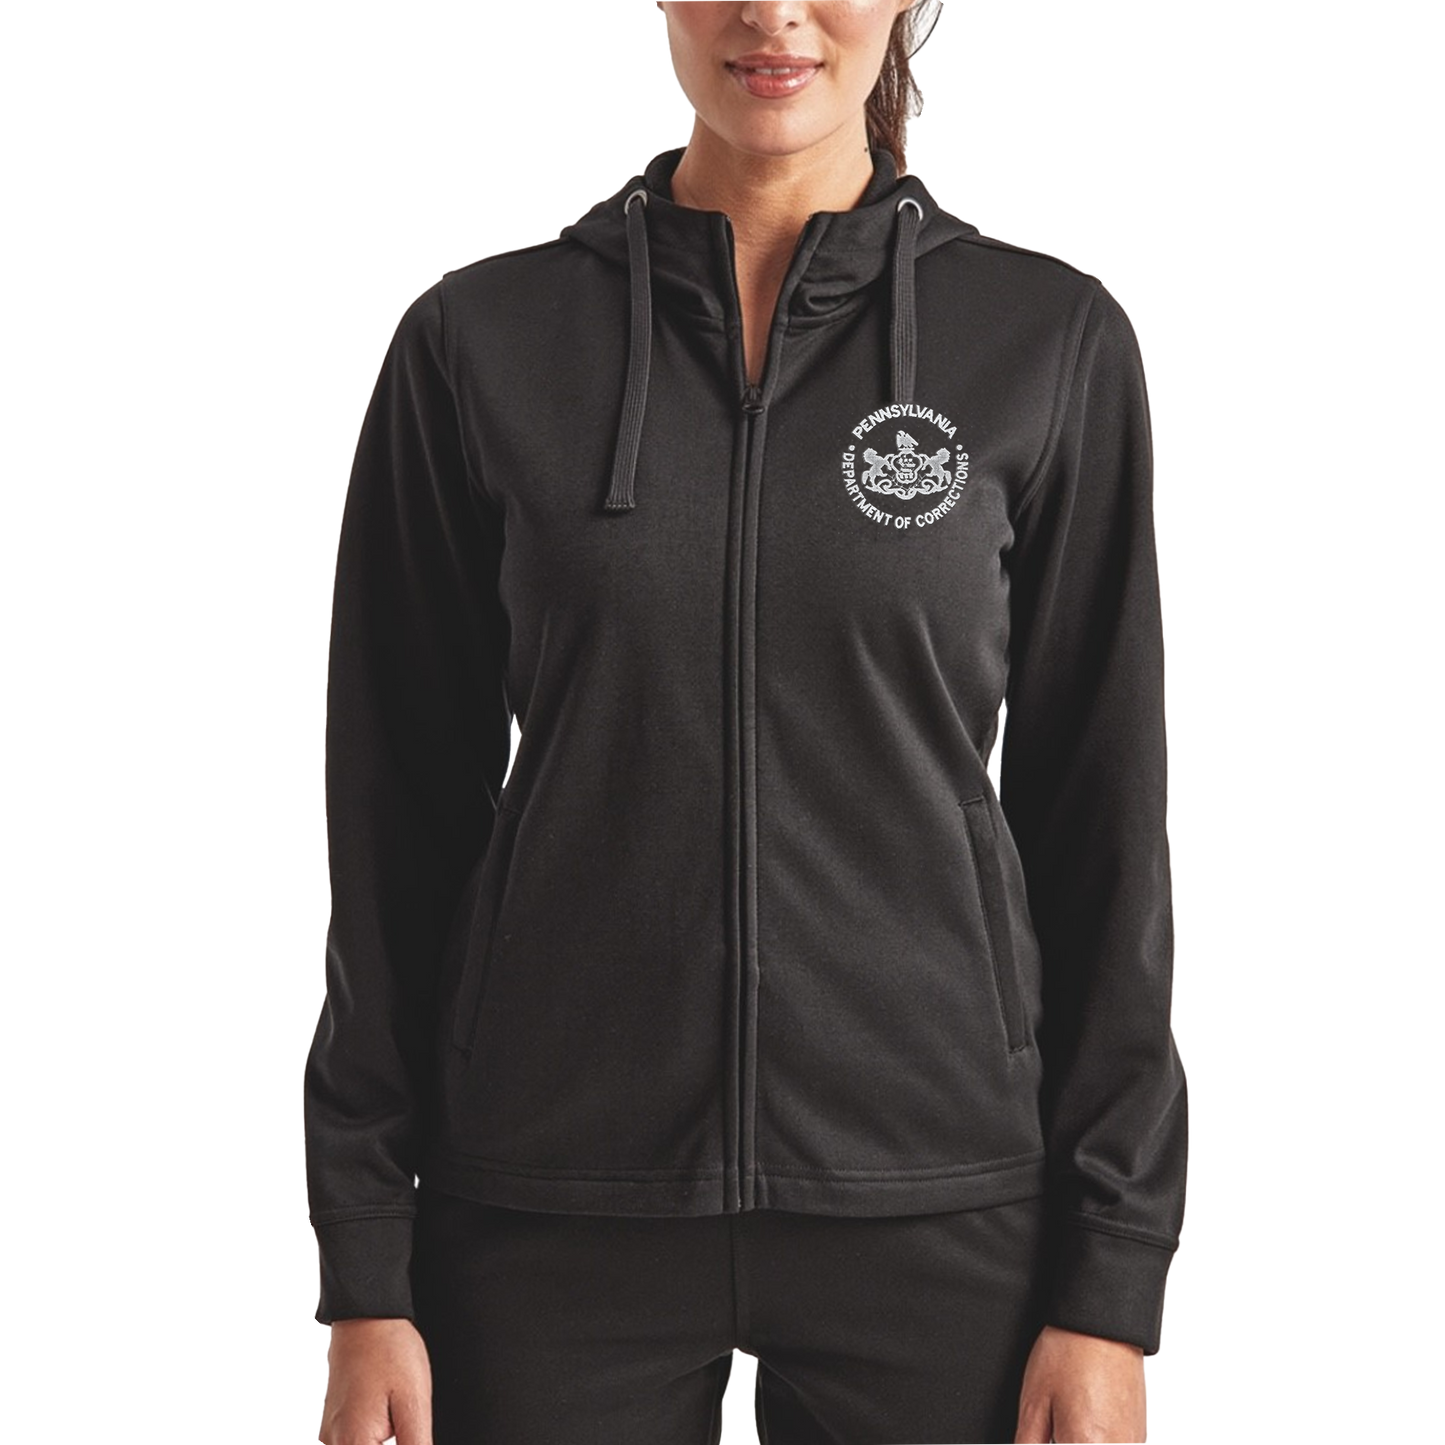 Ladies' Performance Hooded Sweatshirt with Embroidered Department of Corrections Logos (Various Colors)